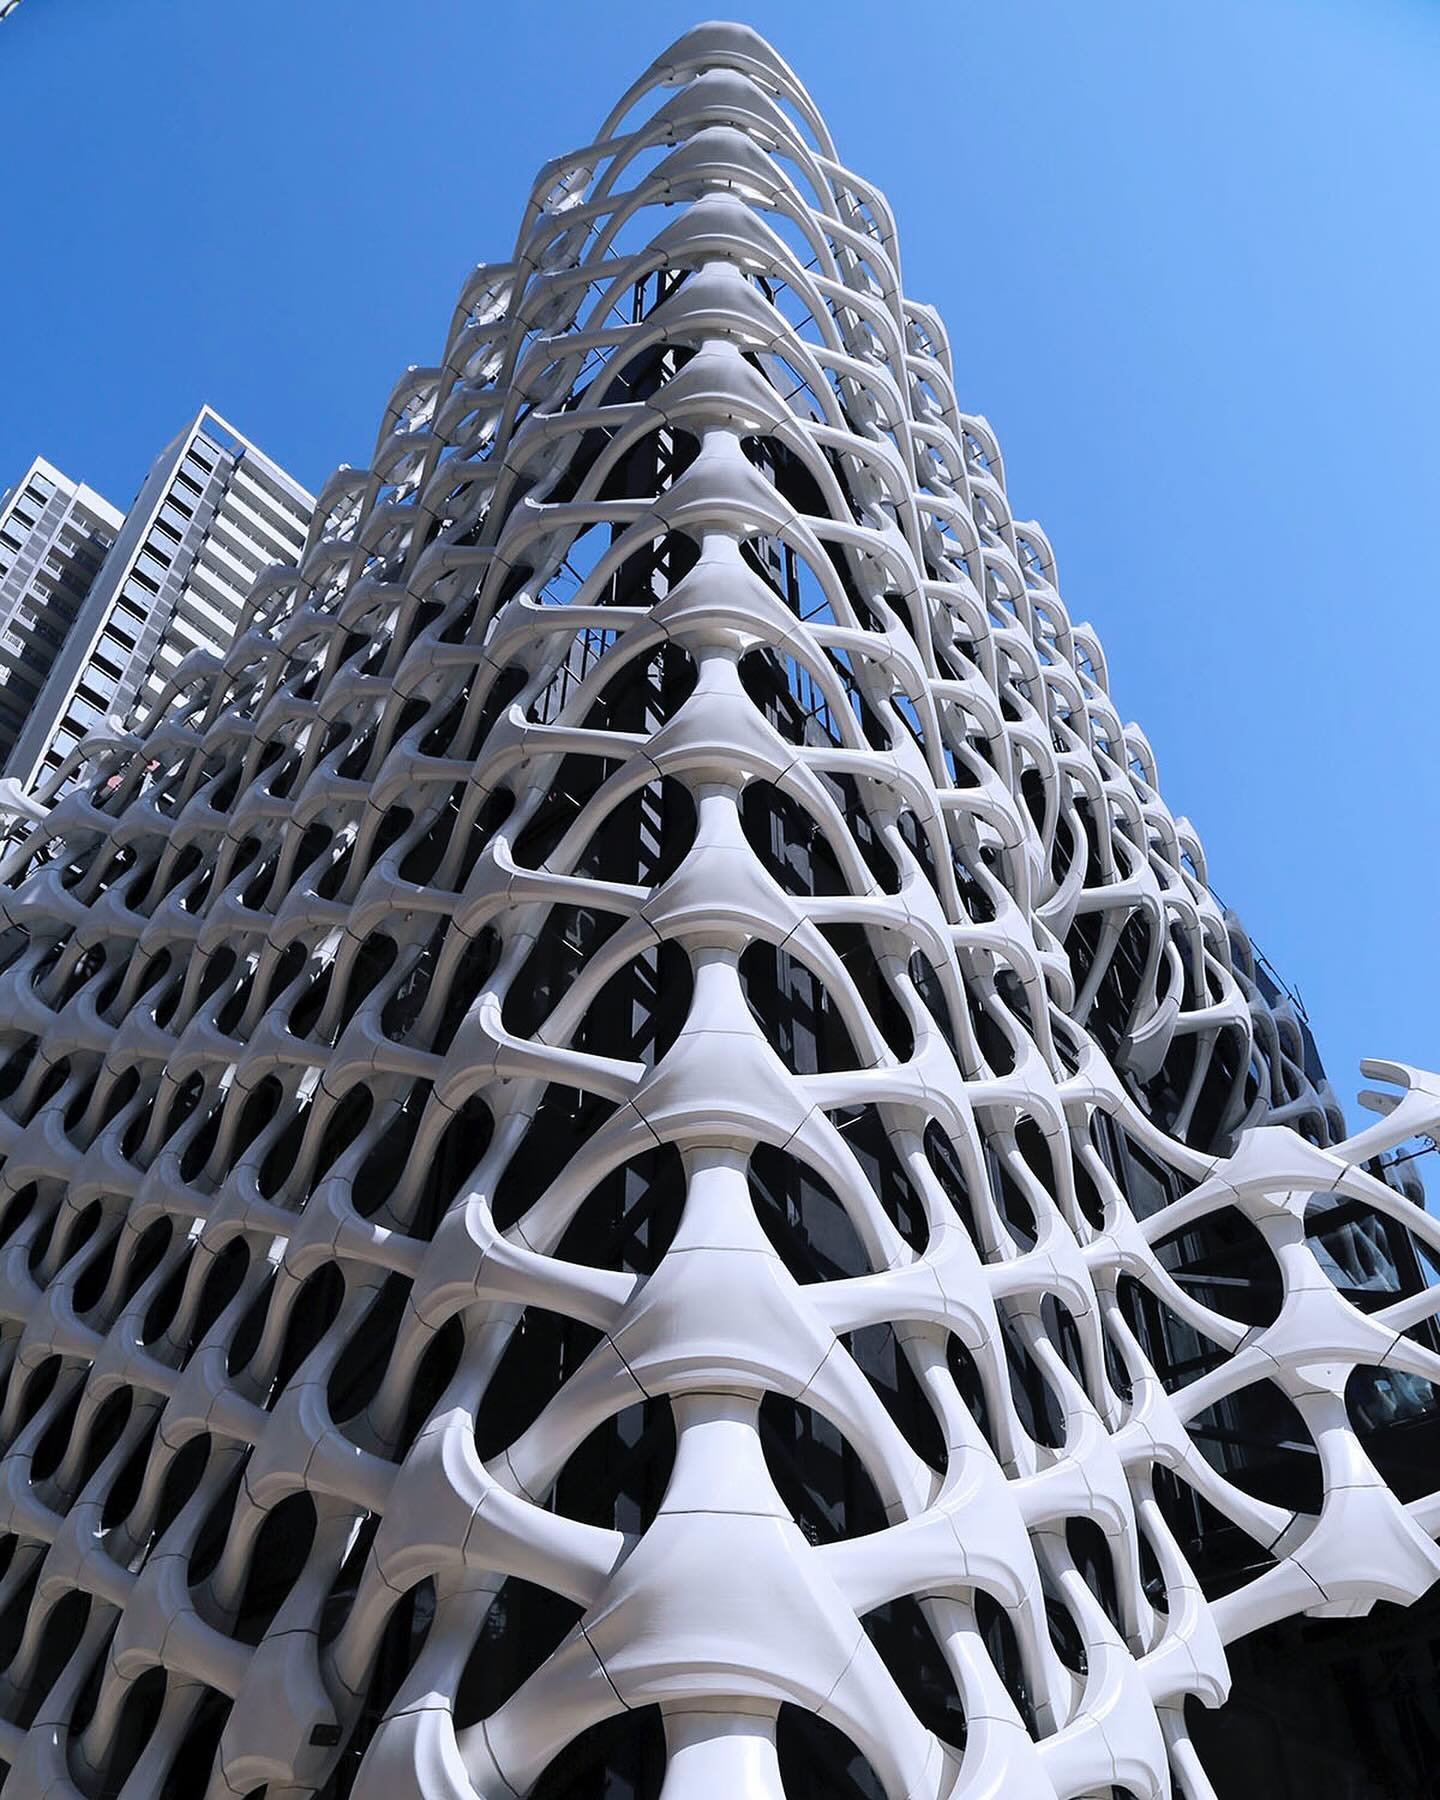 // Arachne - 3D Printed Facade 

Arachne is an innovative digital architectural project, designed by ASW, that transforms an ordinary three-story building, measuring 10 meters in height and 12 meters in width, through the use of 3D printed components